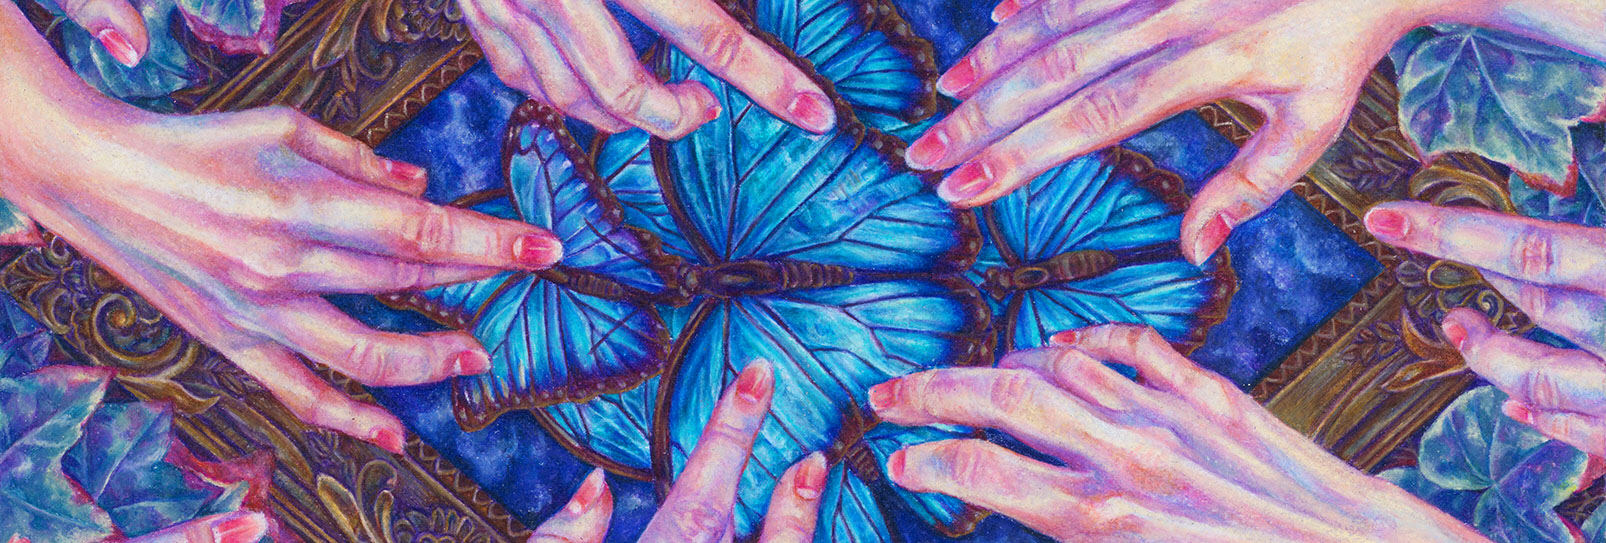 A painting of hands and blue butterflies.